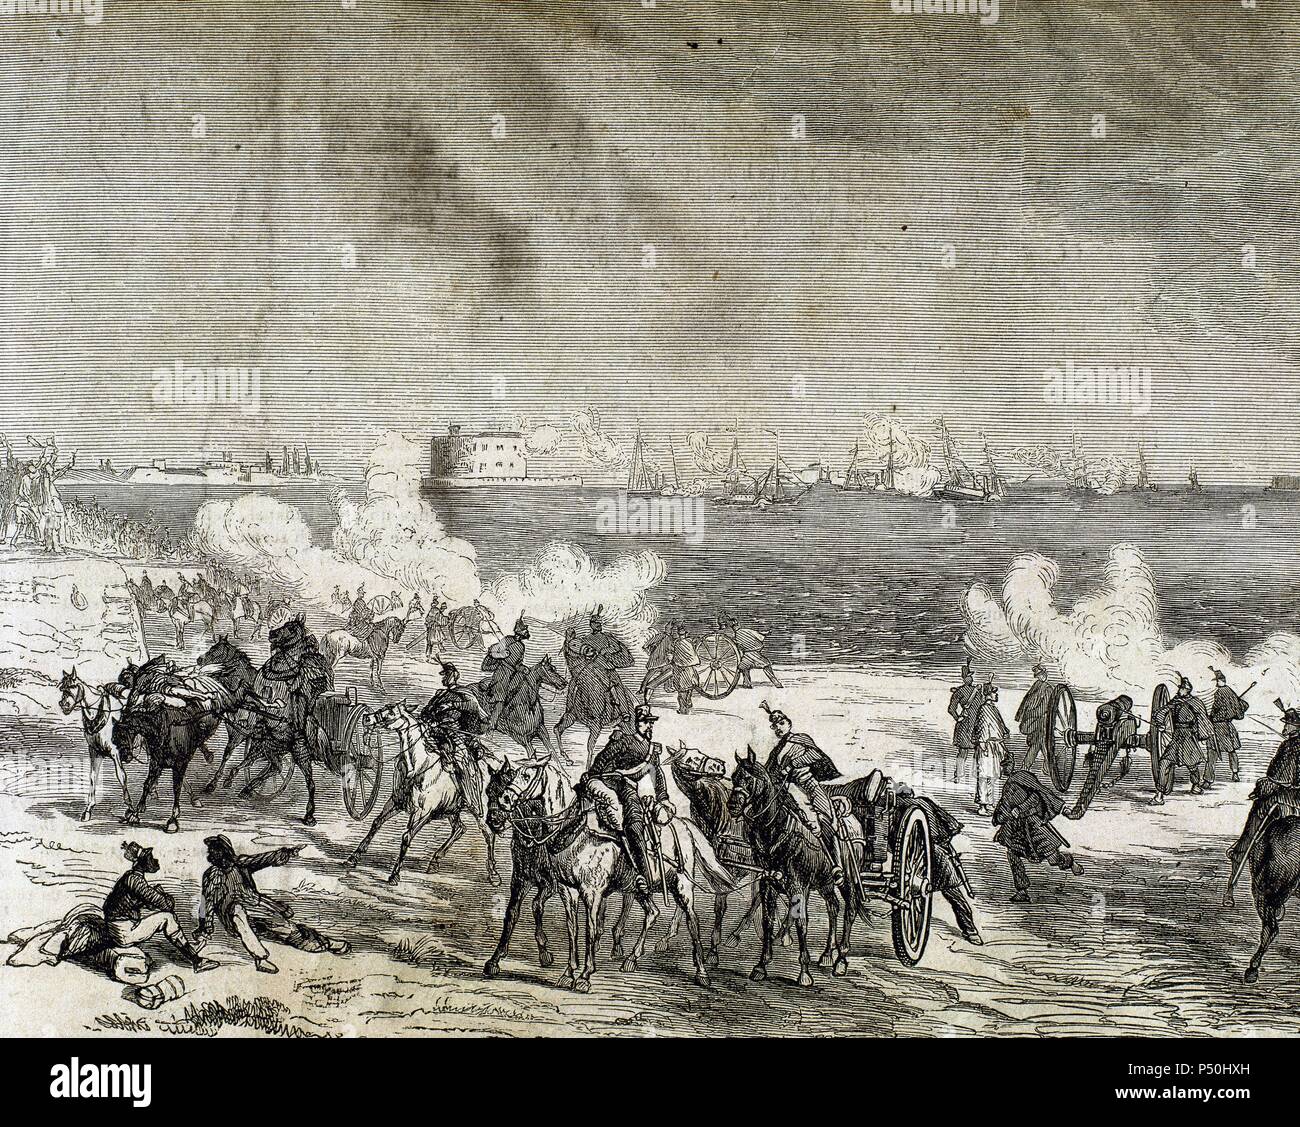 United States. The American Civil War (1861-1865). The batteries in the federal army from the shores of the James River, giving the signal approximation of Merrimac and two Confederate steamers. Engraving. Stock Photo